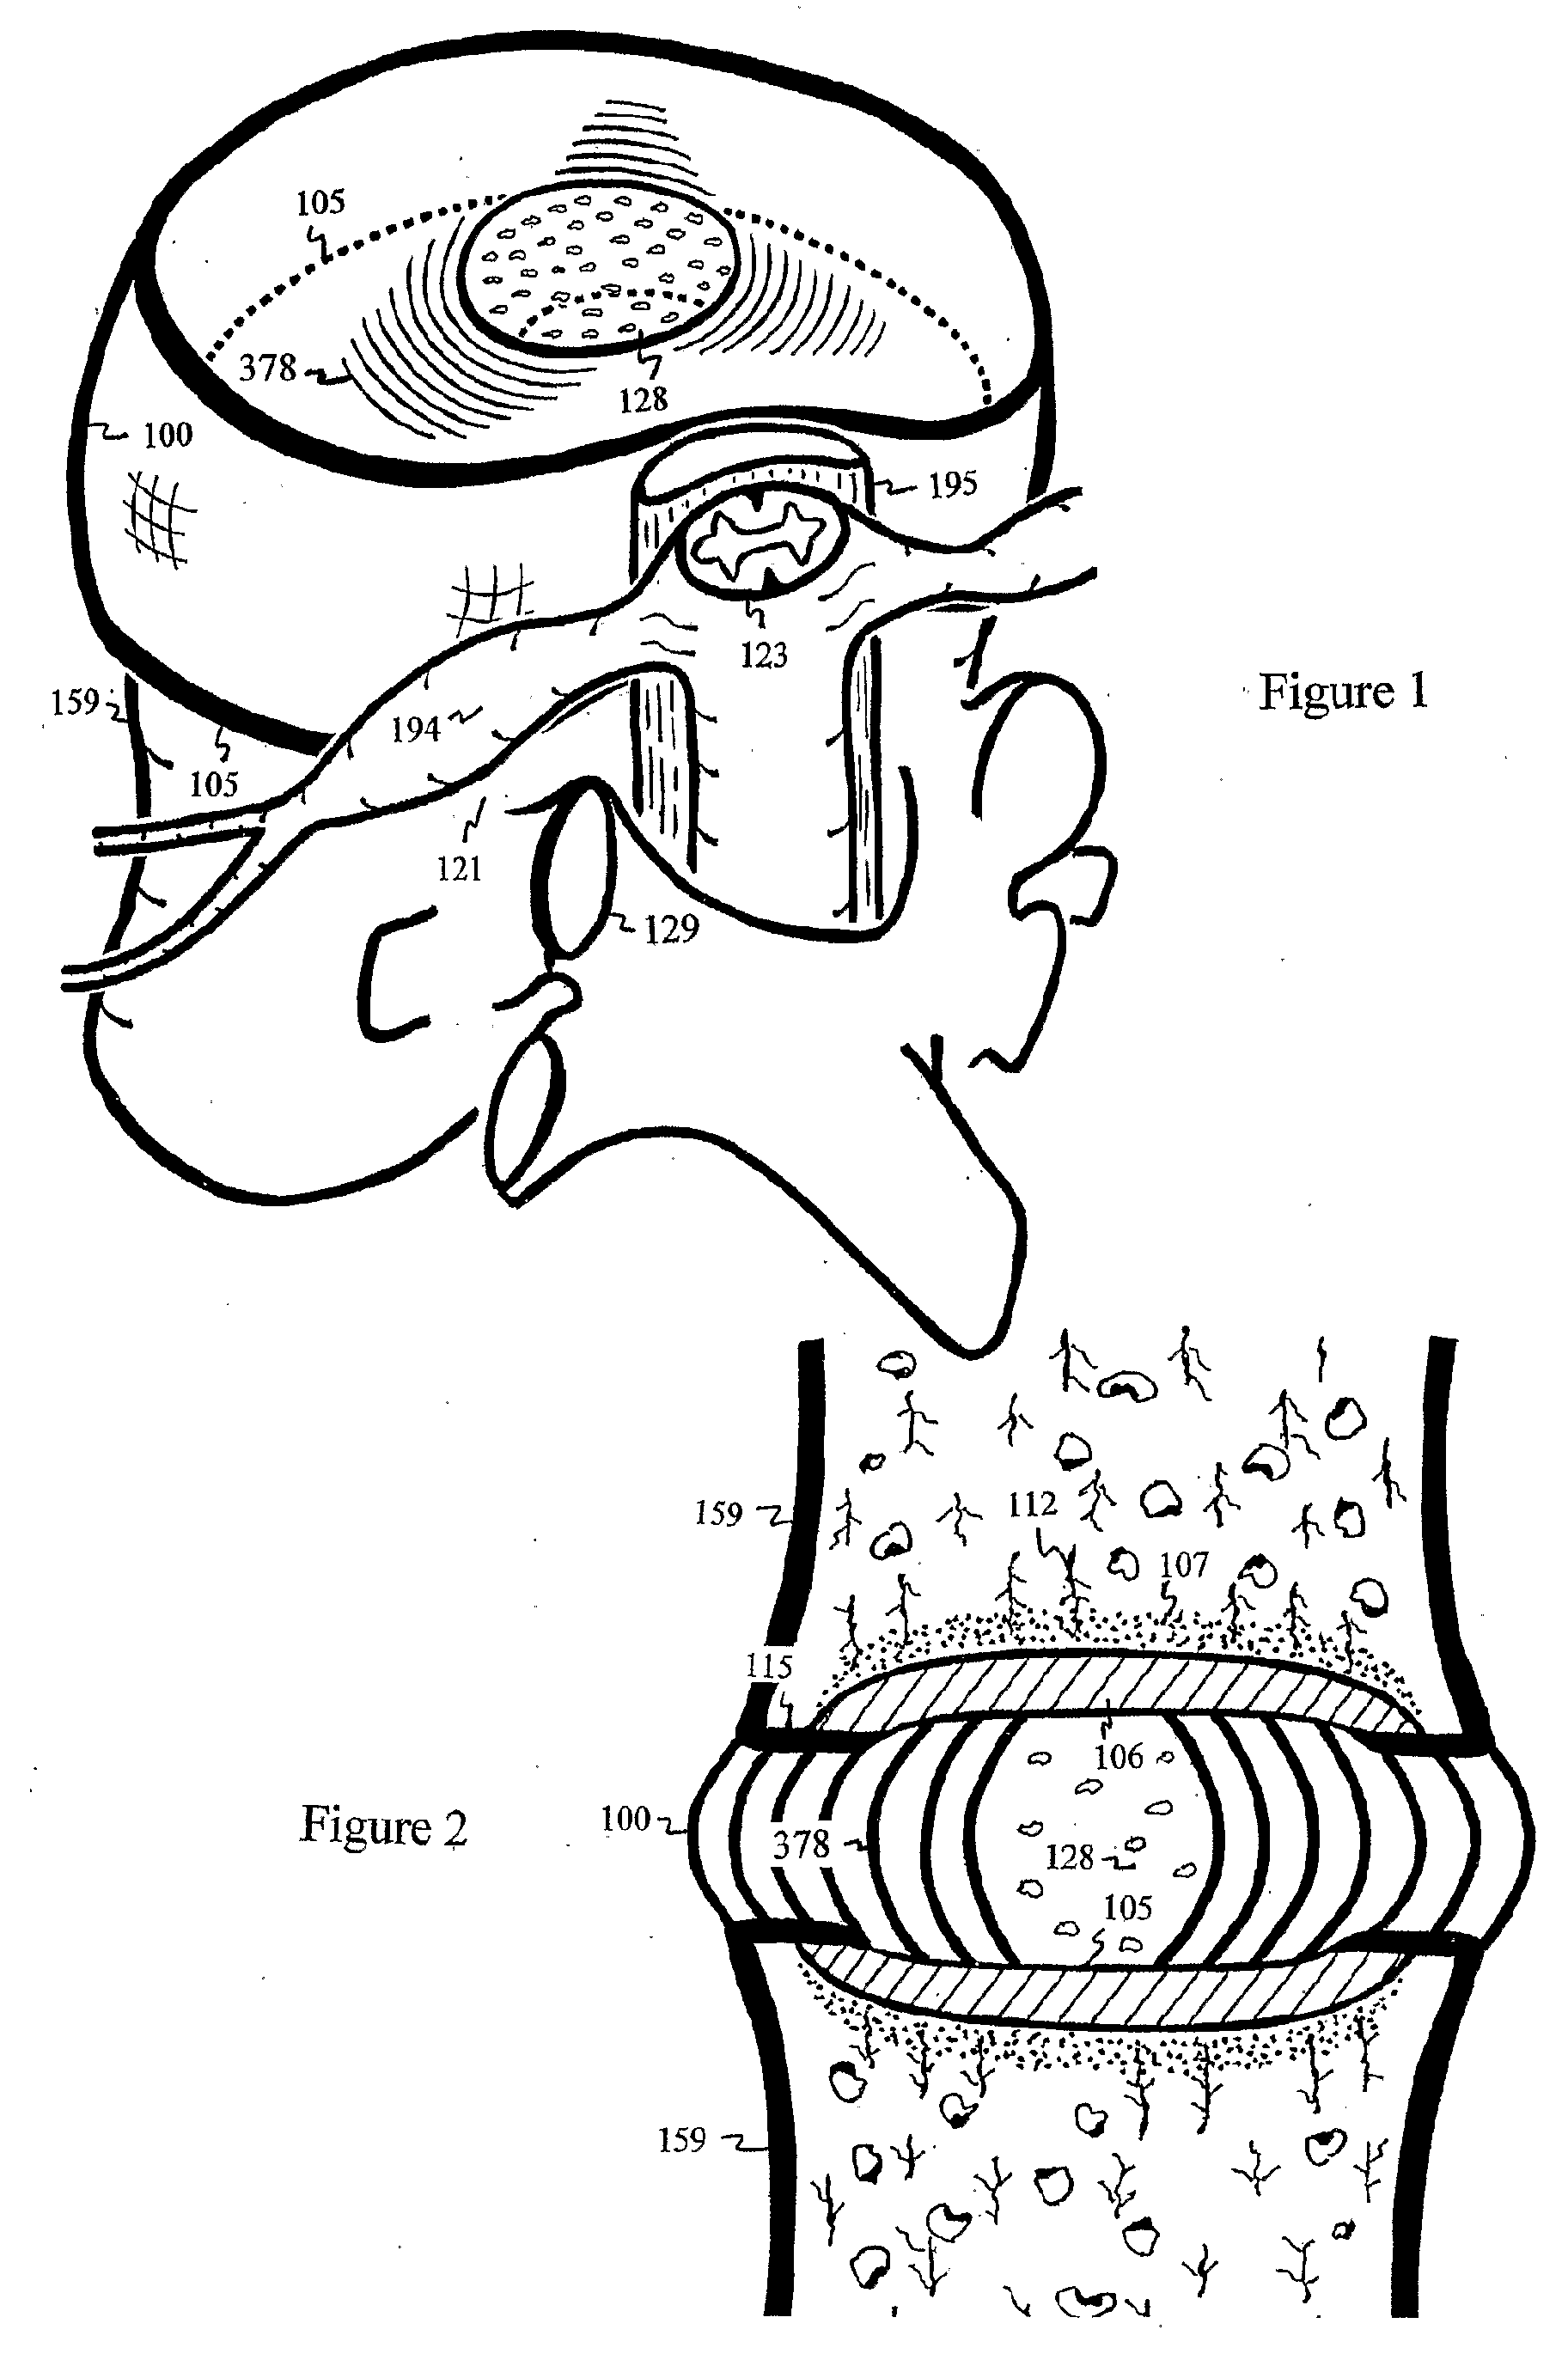 Injection device for the intervertebral disc